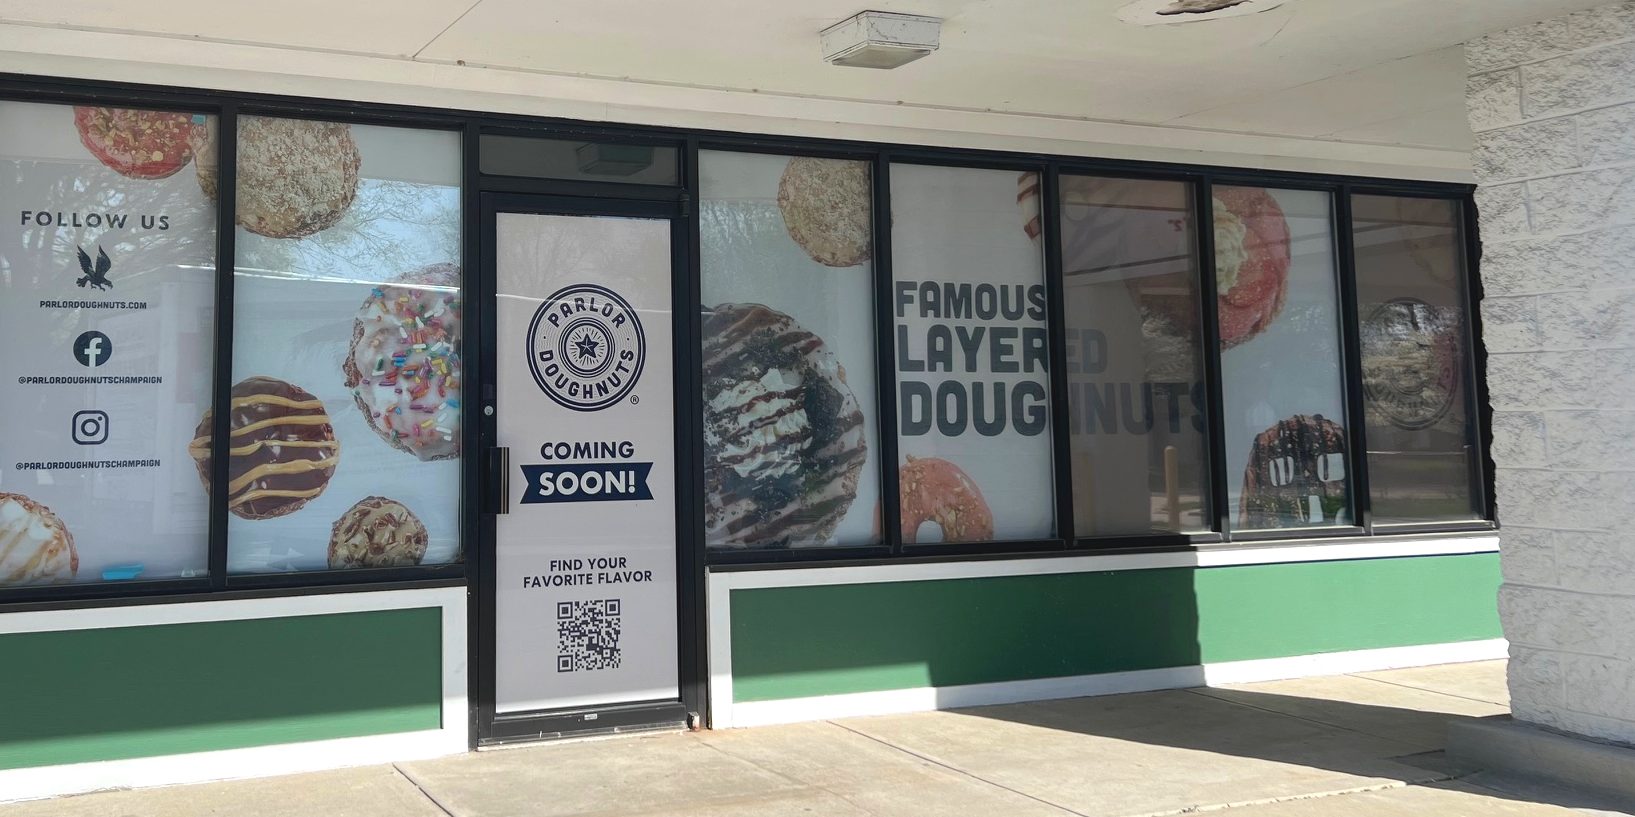 The exterior of a plaza doughnut shop has white paper in the windows with oversized doughnuts advertising the coming soon Parlor Doughnuts of Champaign.